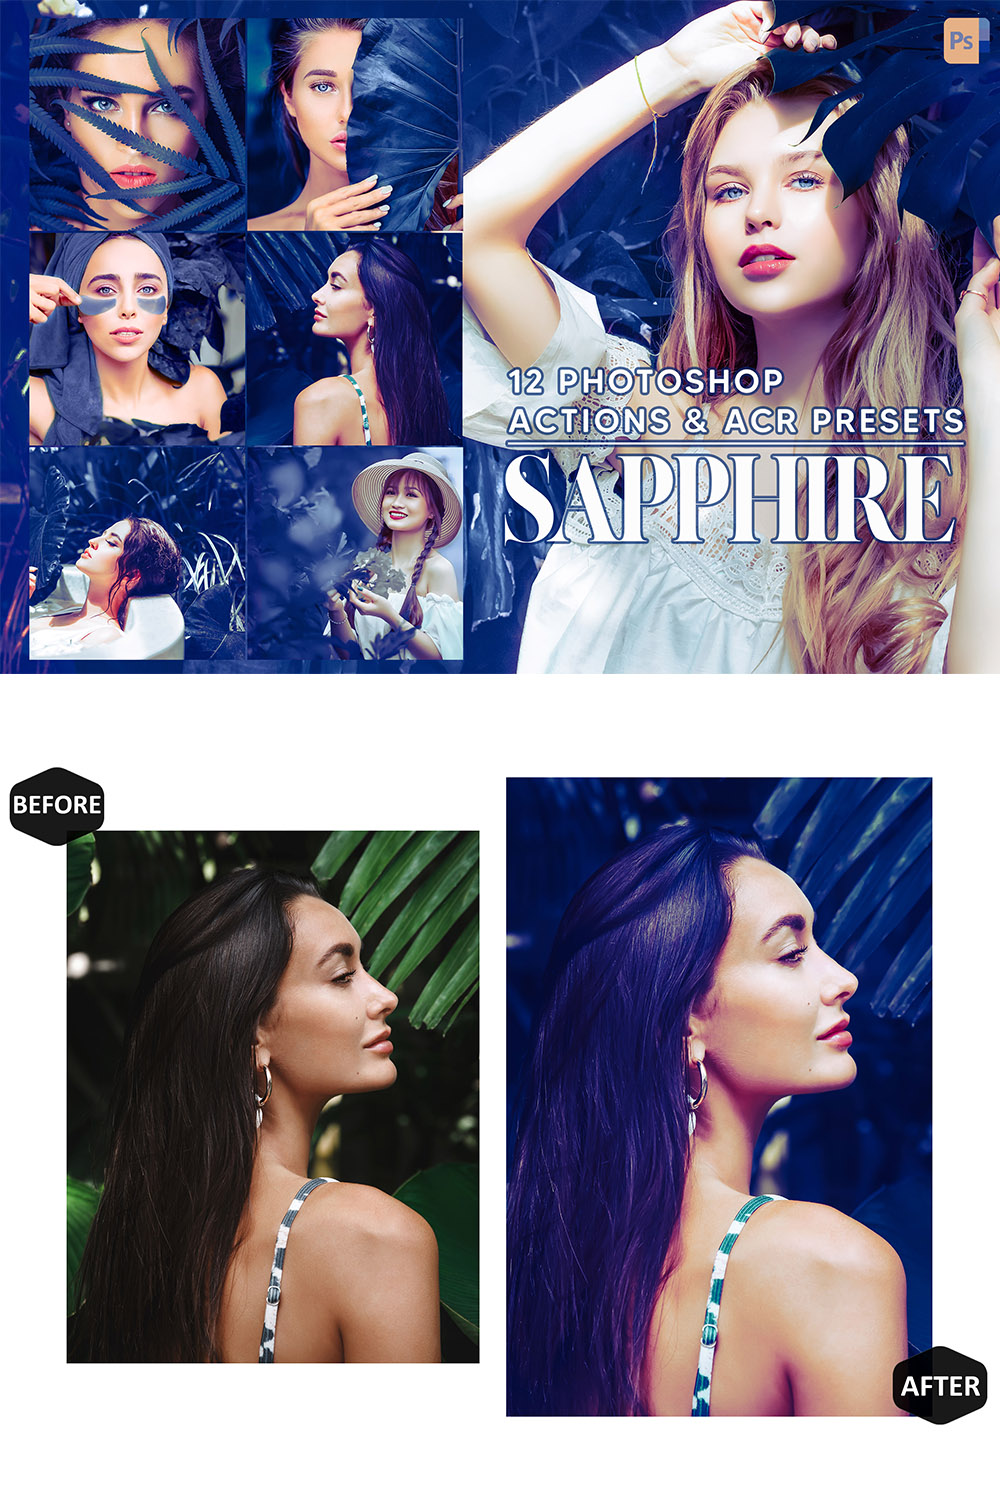 12 Photoshop Actions, Sapphire Ps Action, Blue dark ACR Preset, jungle Ps Filter, Portrait And Lifestyle Theme For Instagram, Blogger pinterest preview image.